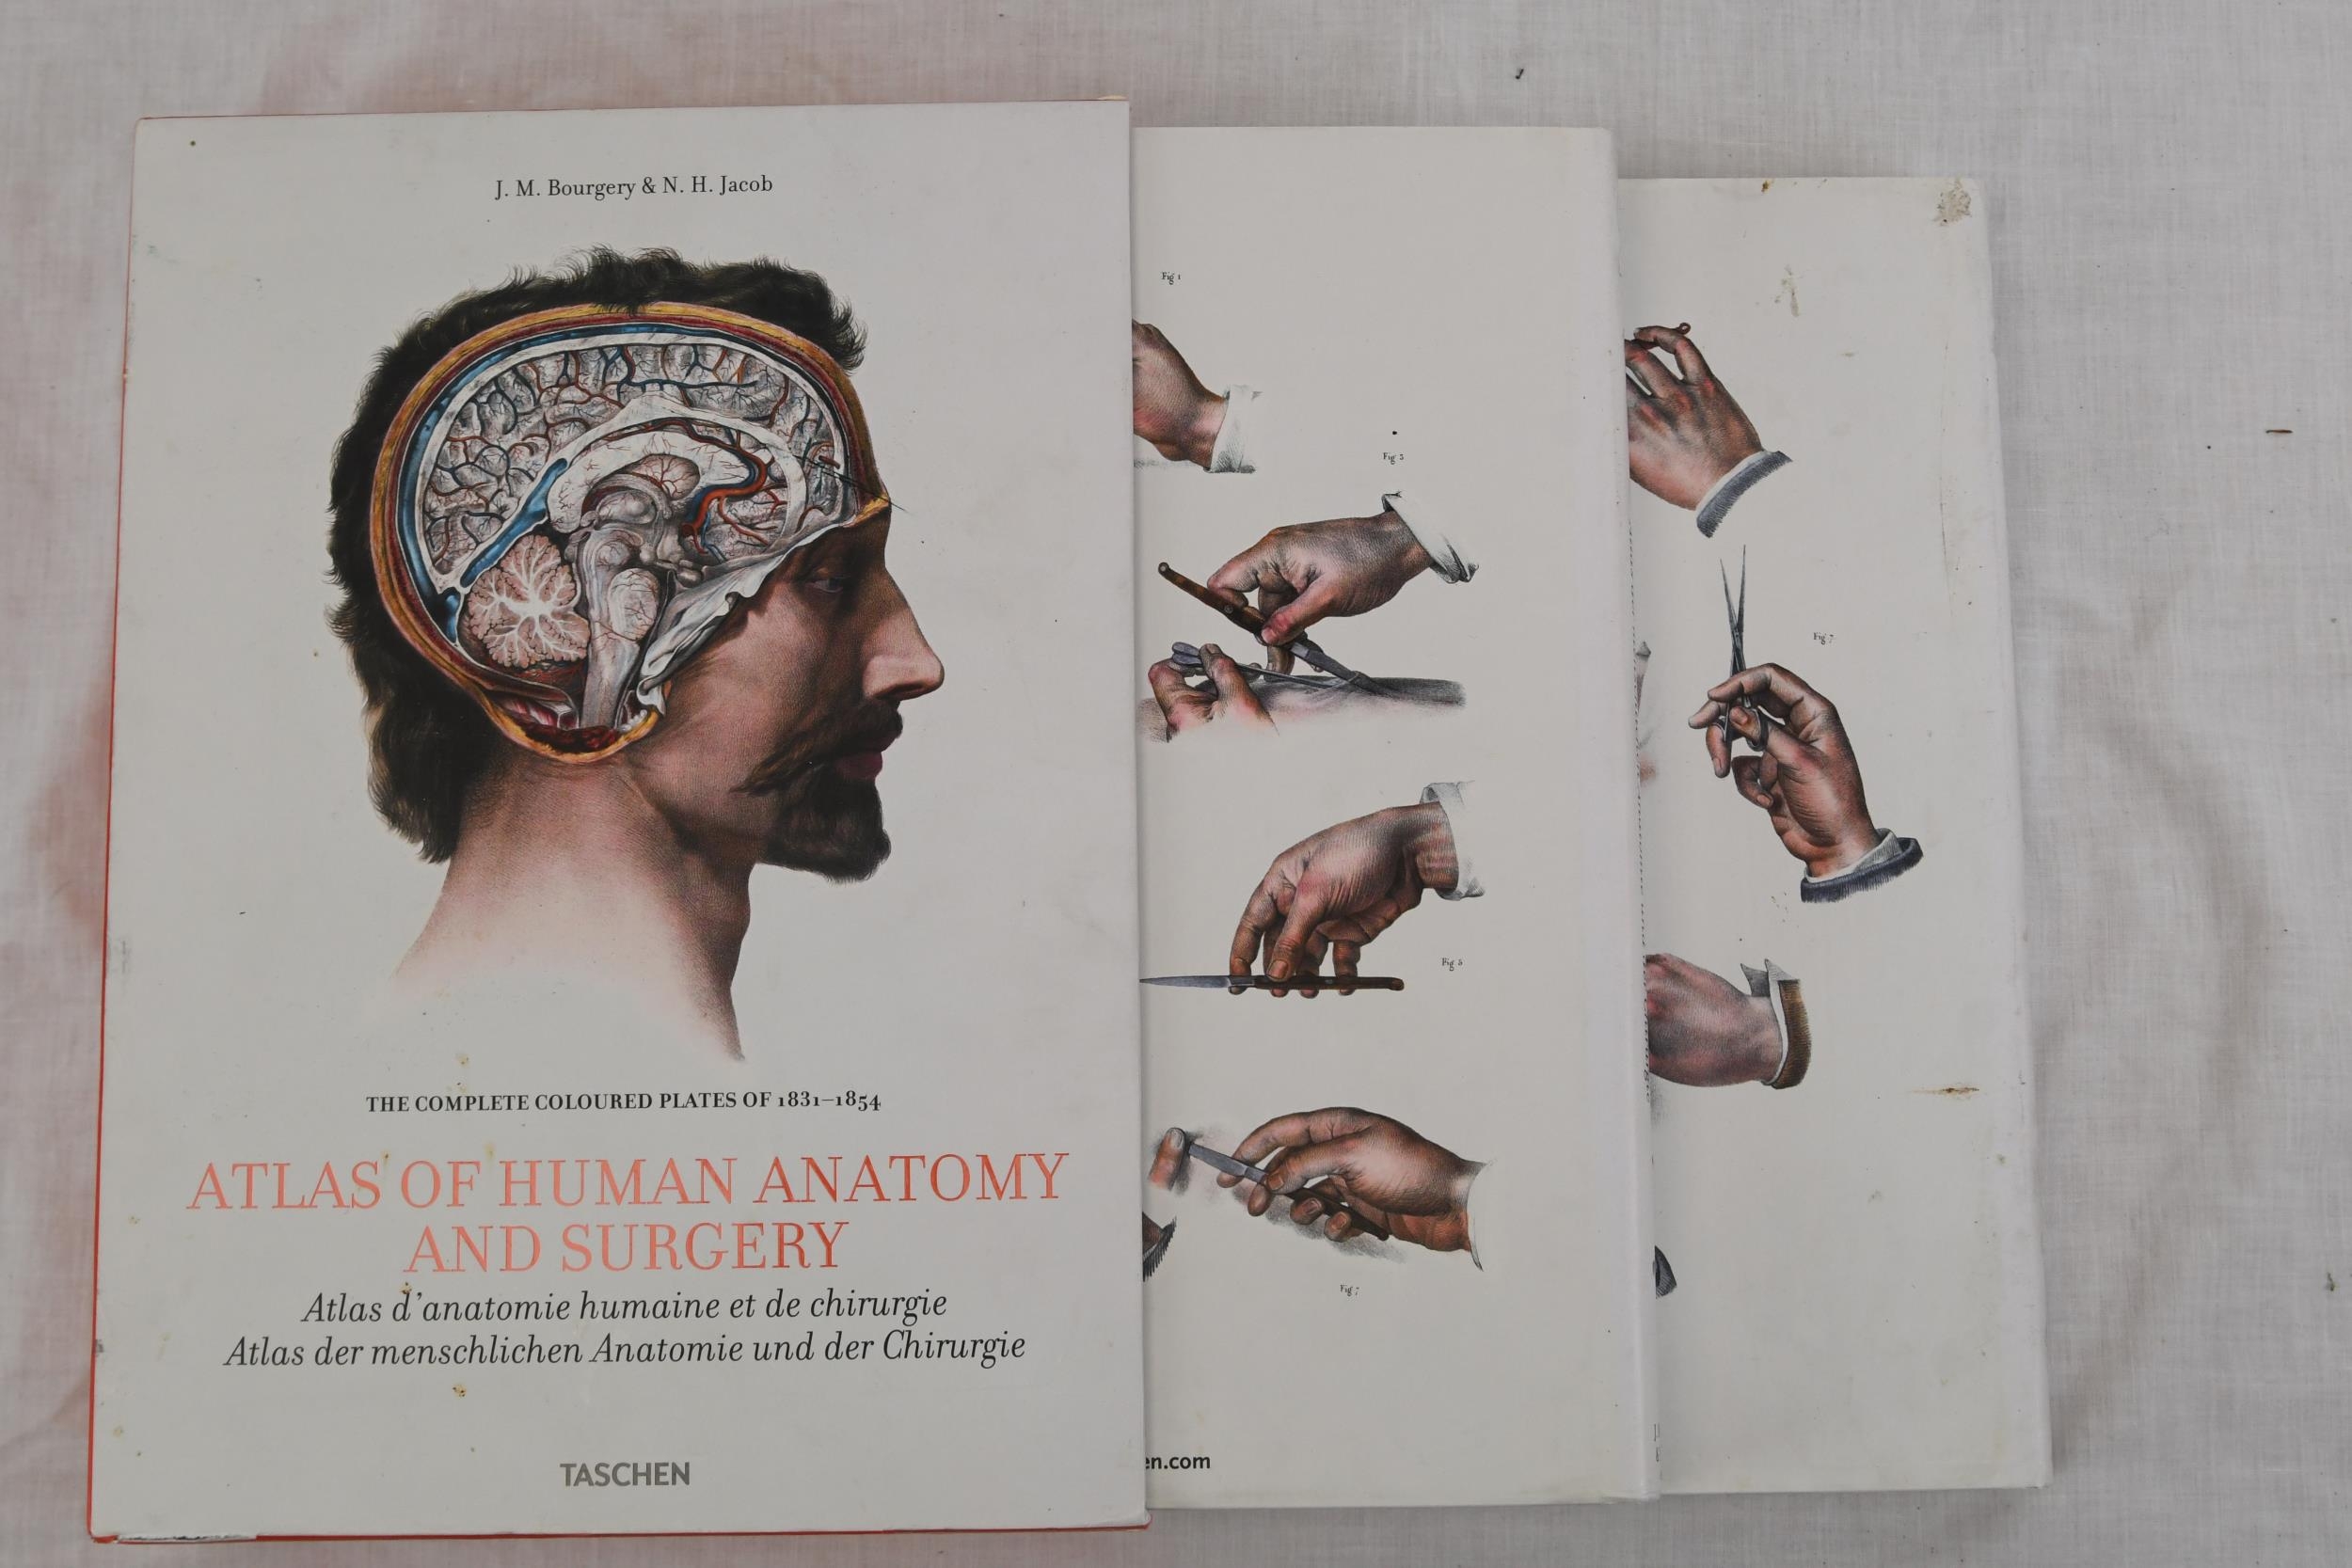 The Complete Atlas of Human Anatomy and Surgery. Published Taschen. 832 pages. A two volume set in a